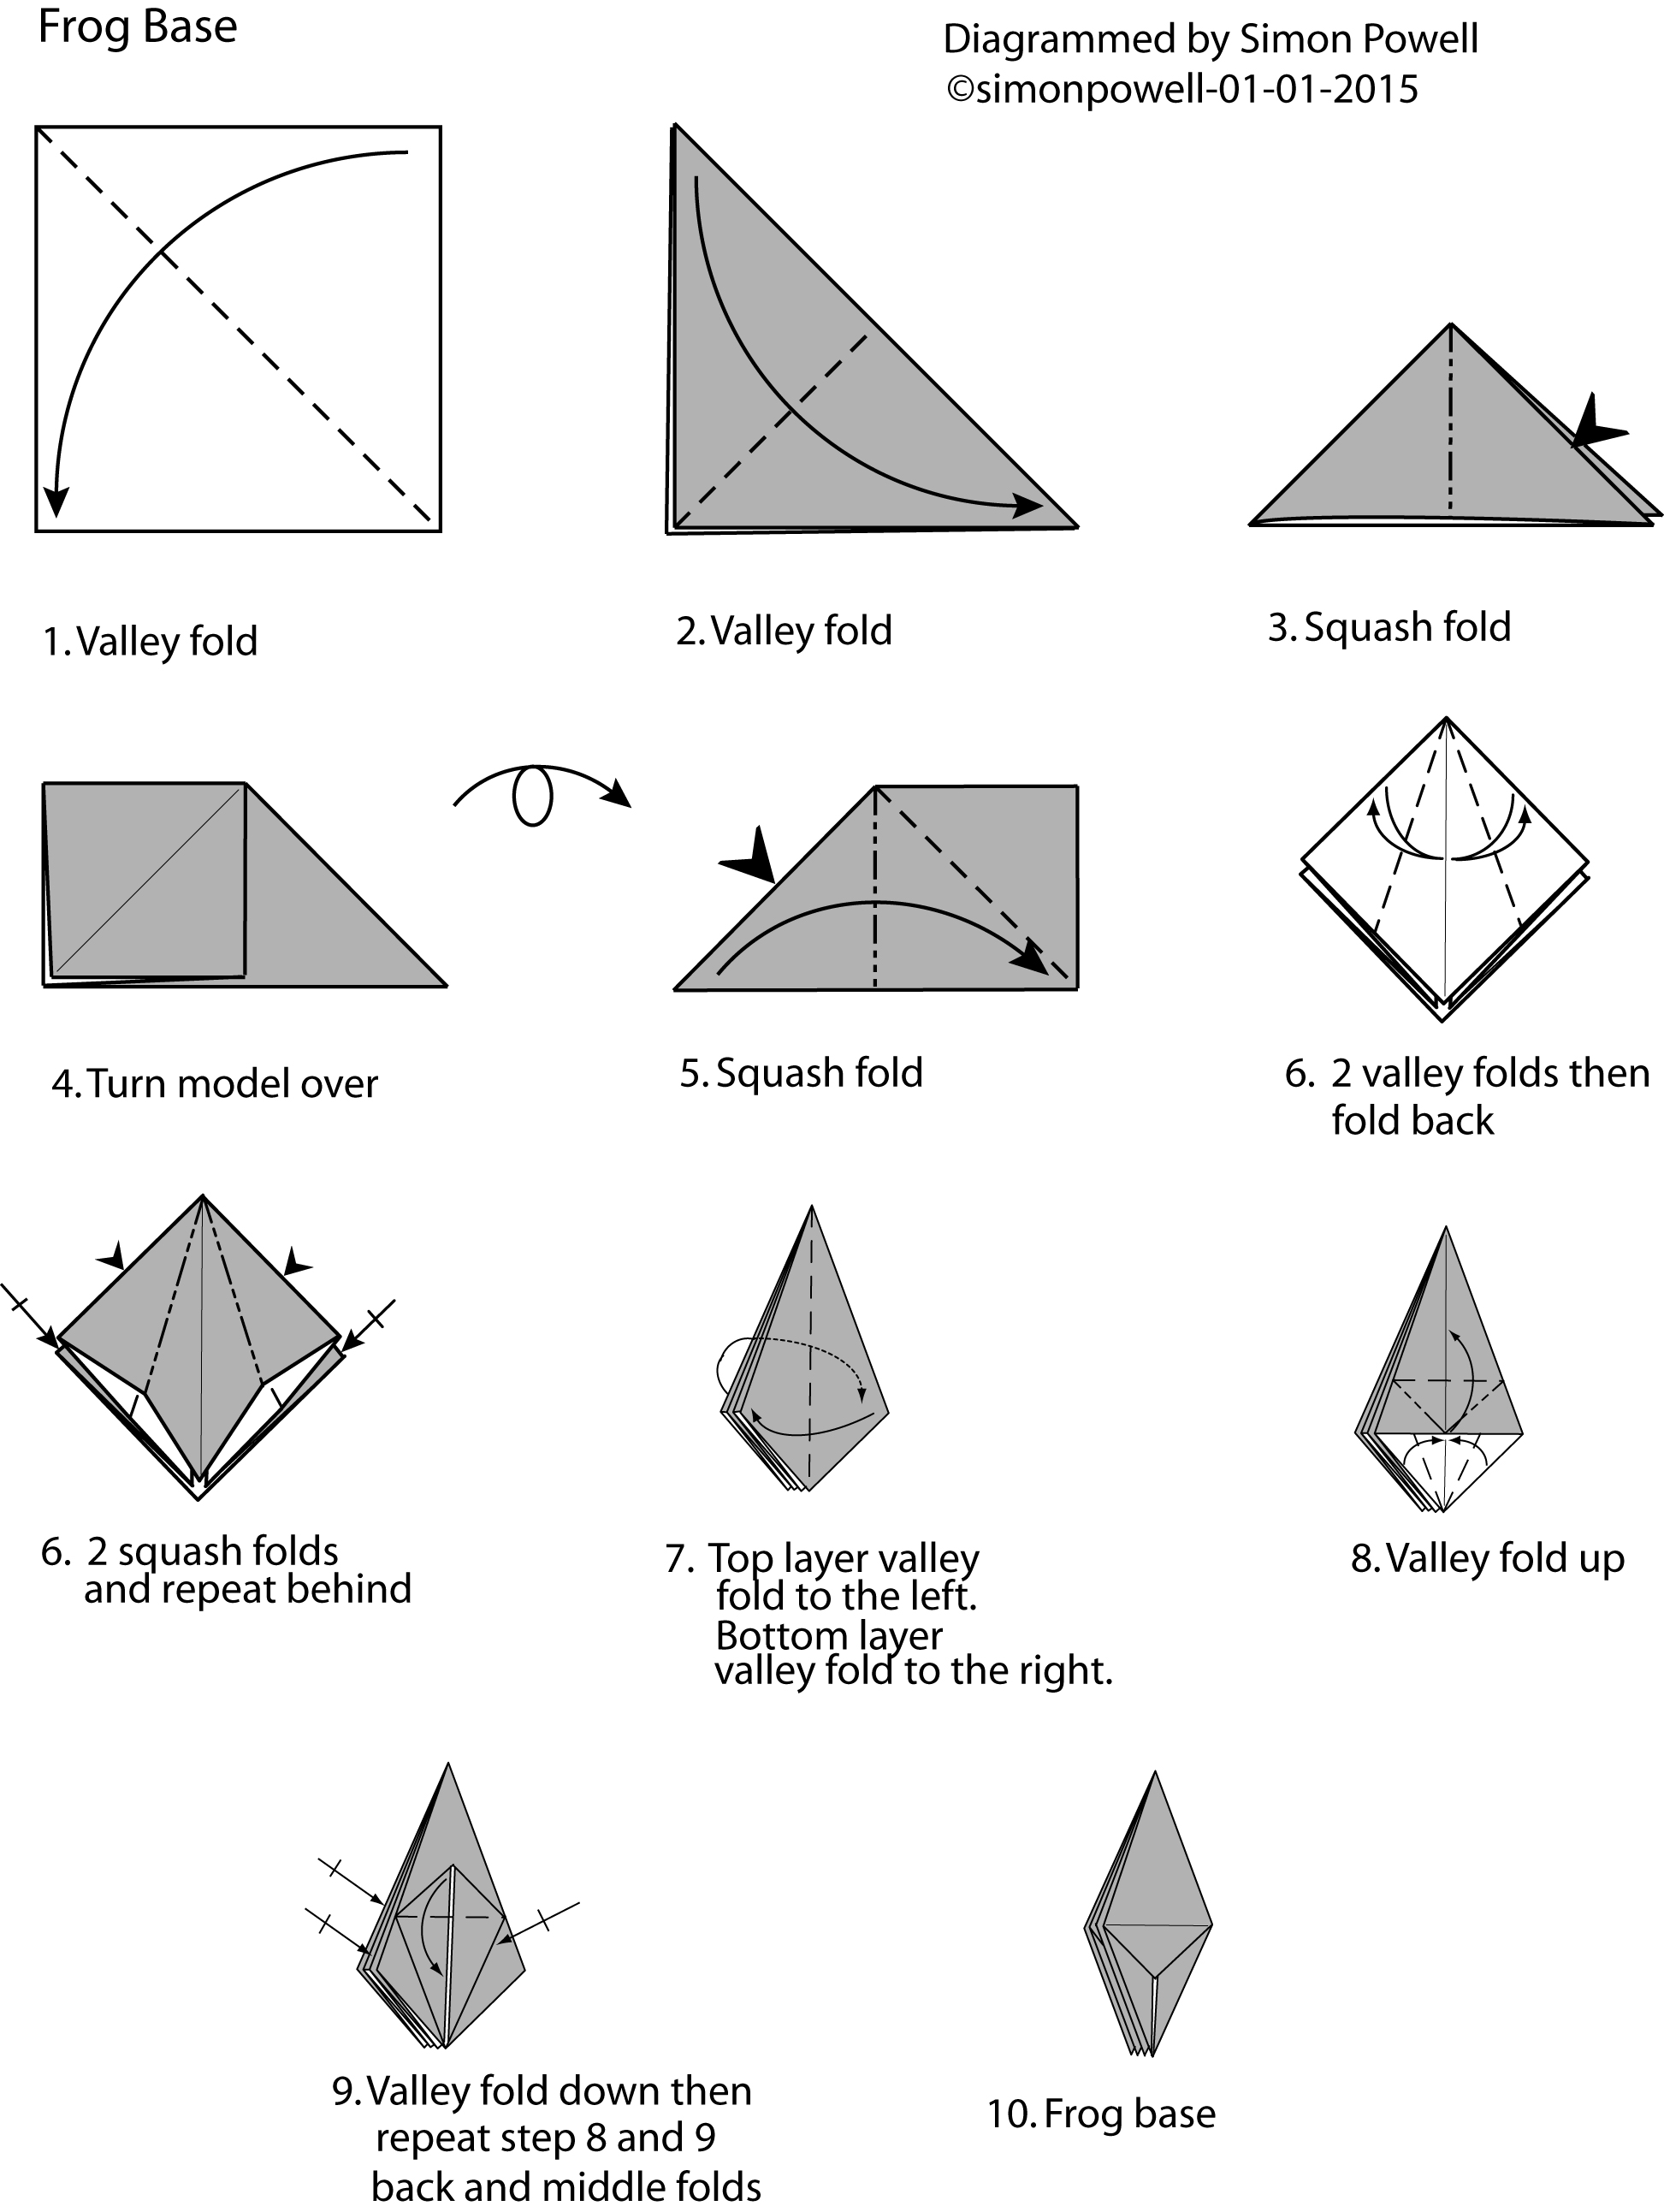 Follow this origami diagram to make the Frog Base.